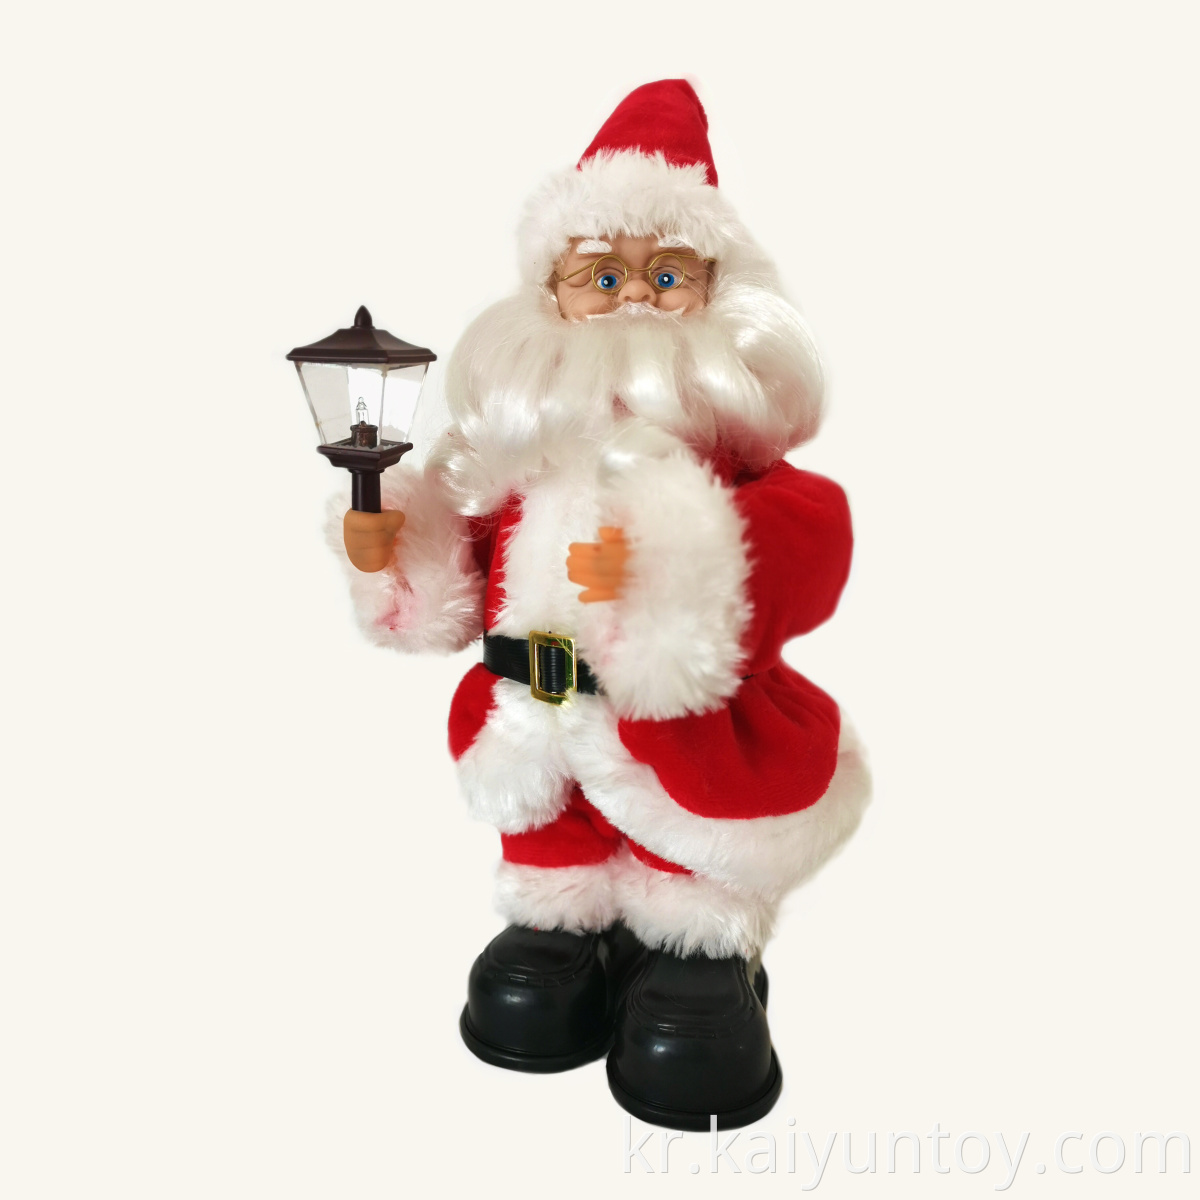 anta Claus Christmas Toy Battery Operated